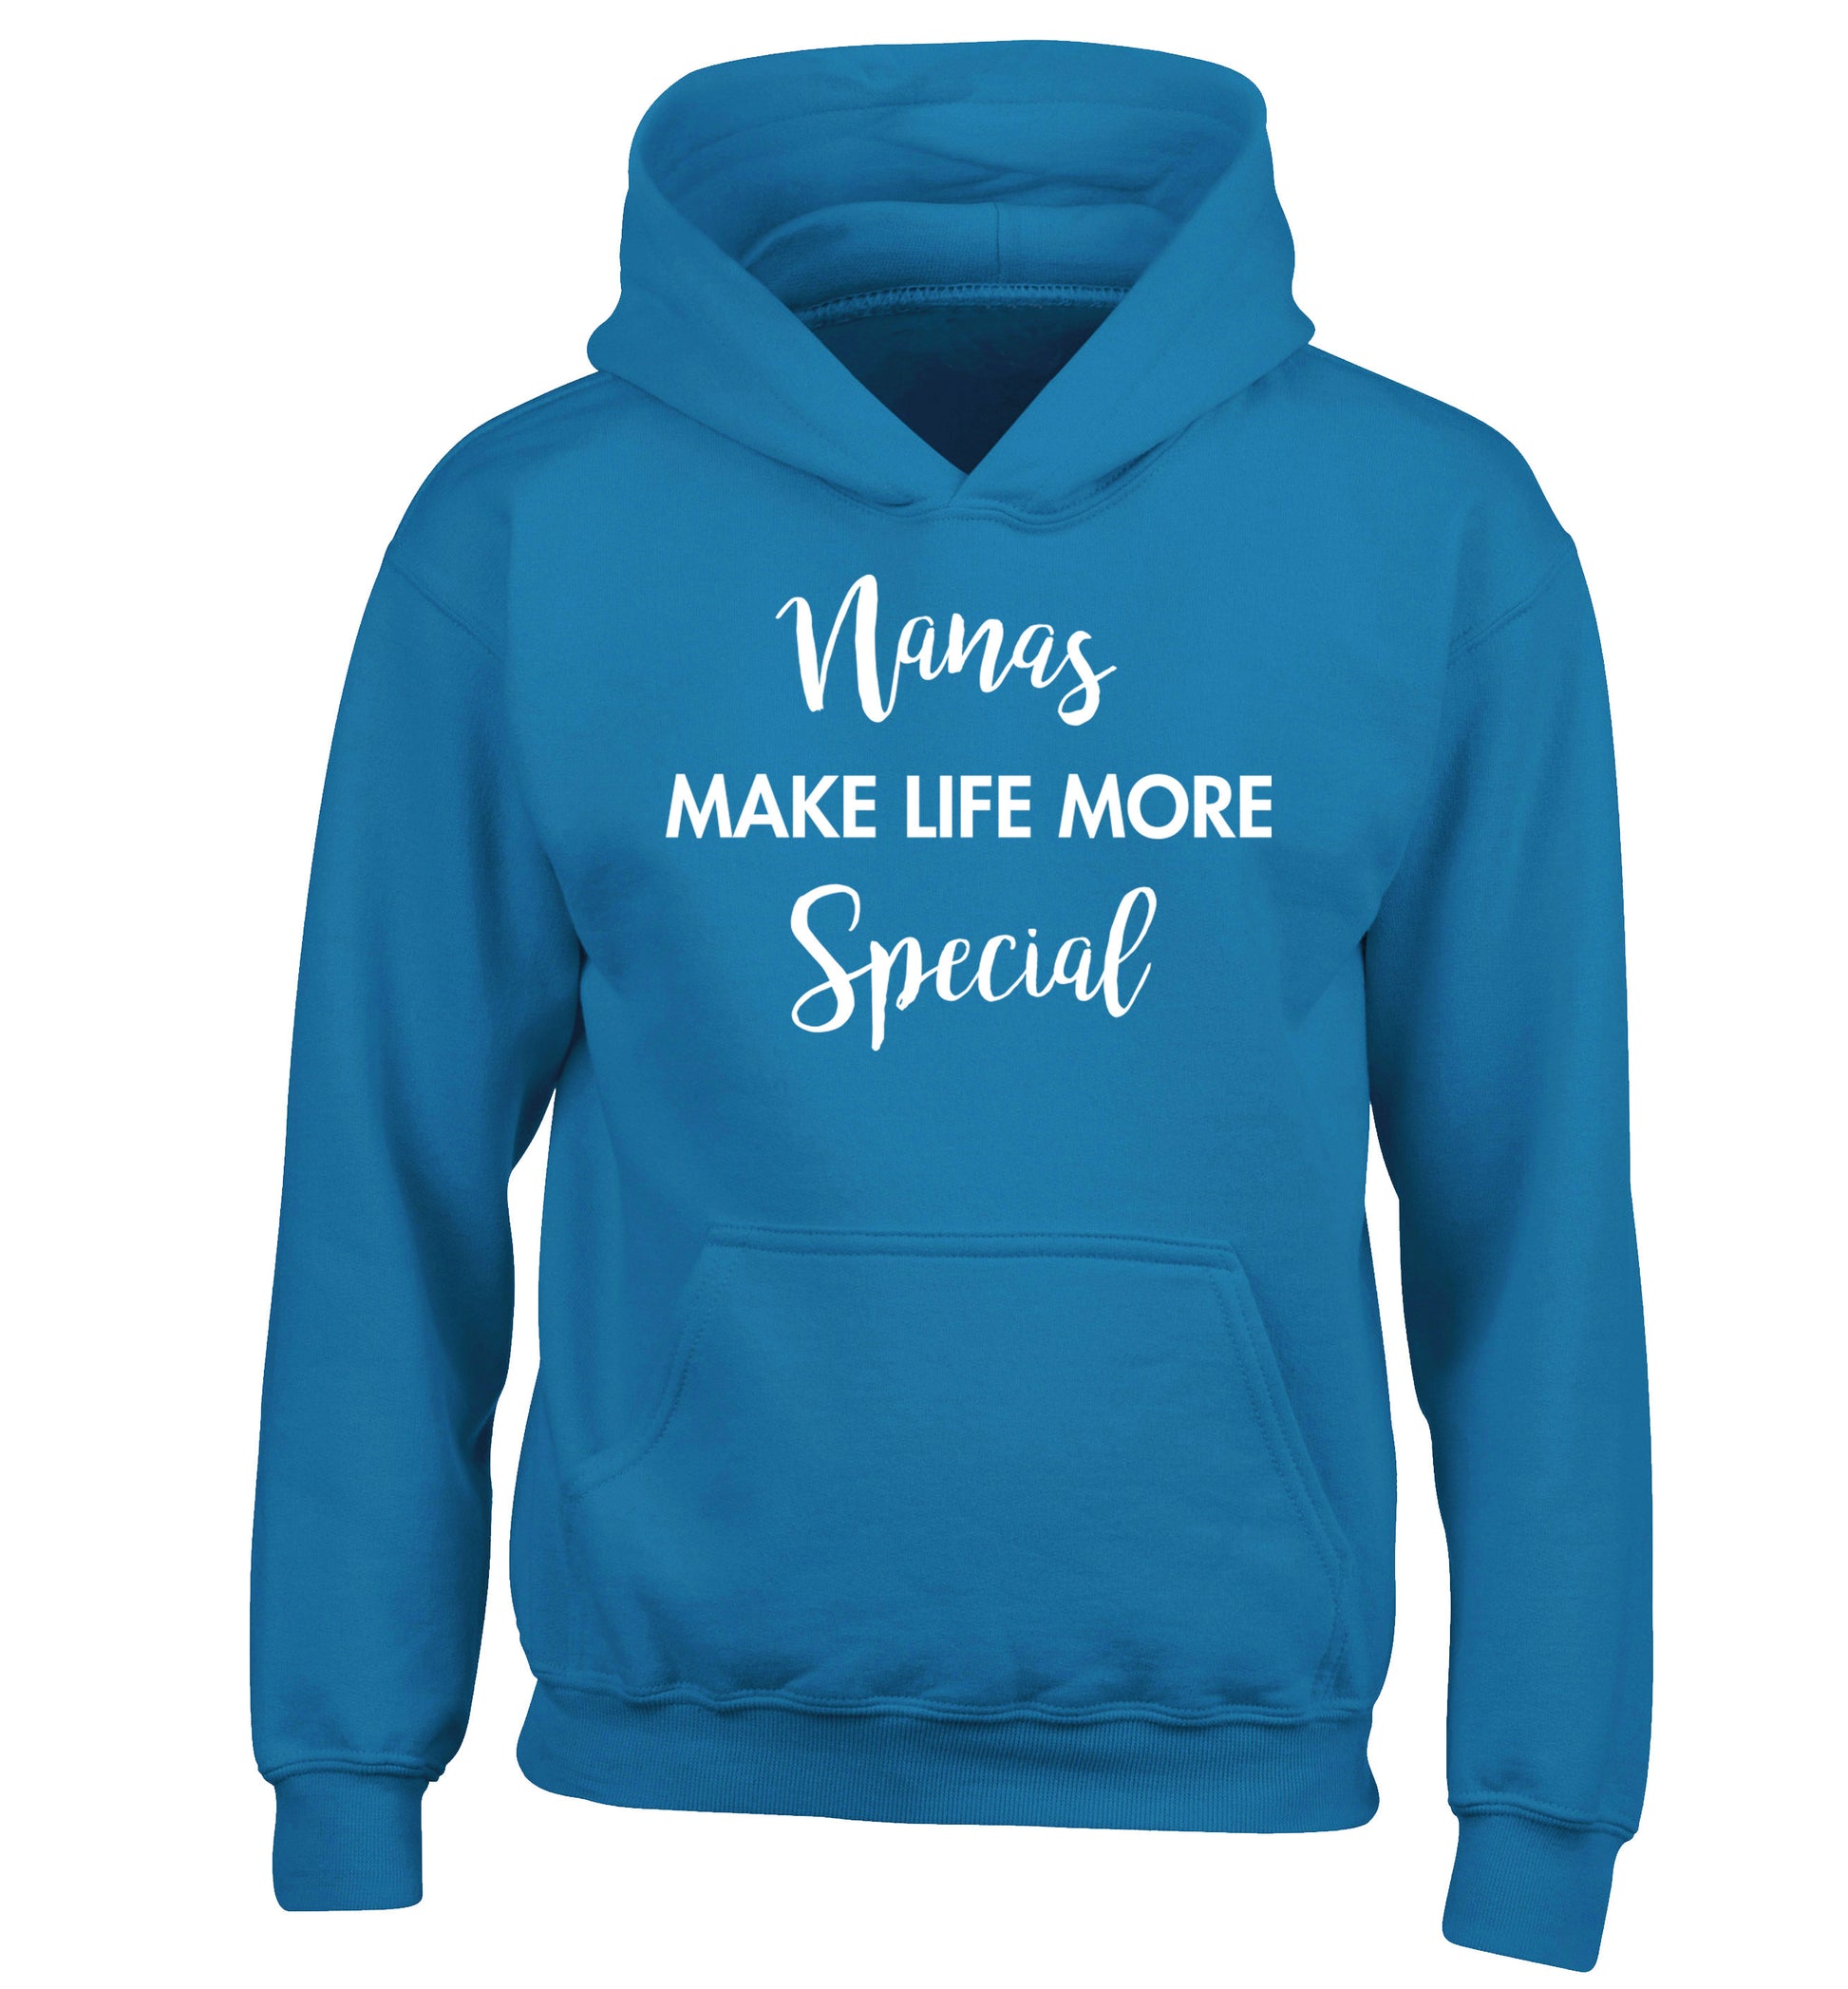 Nanas make life more special children's blue hoodie 12-14 Years